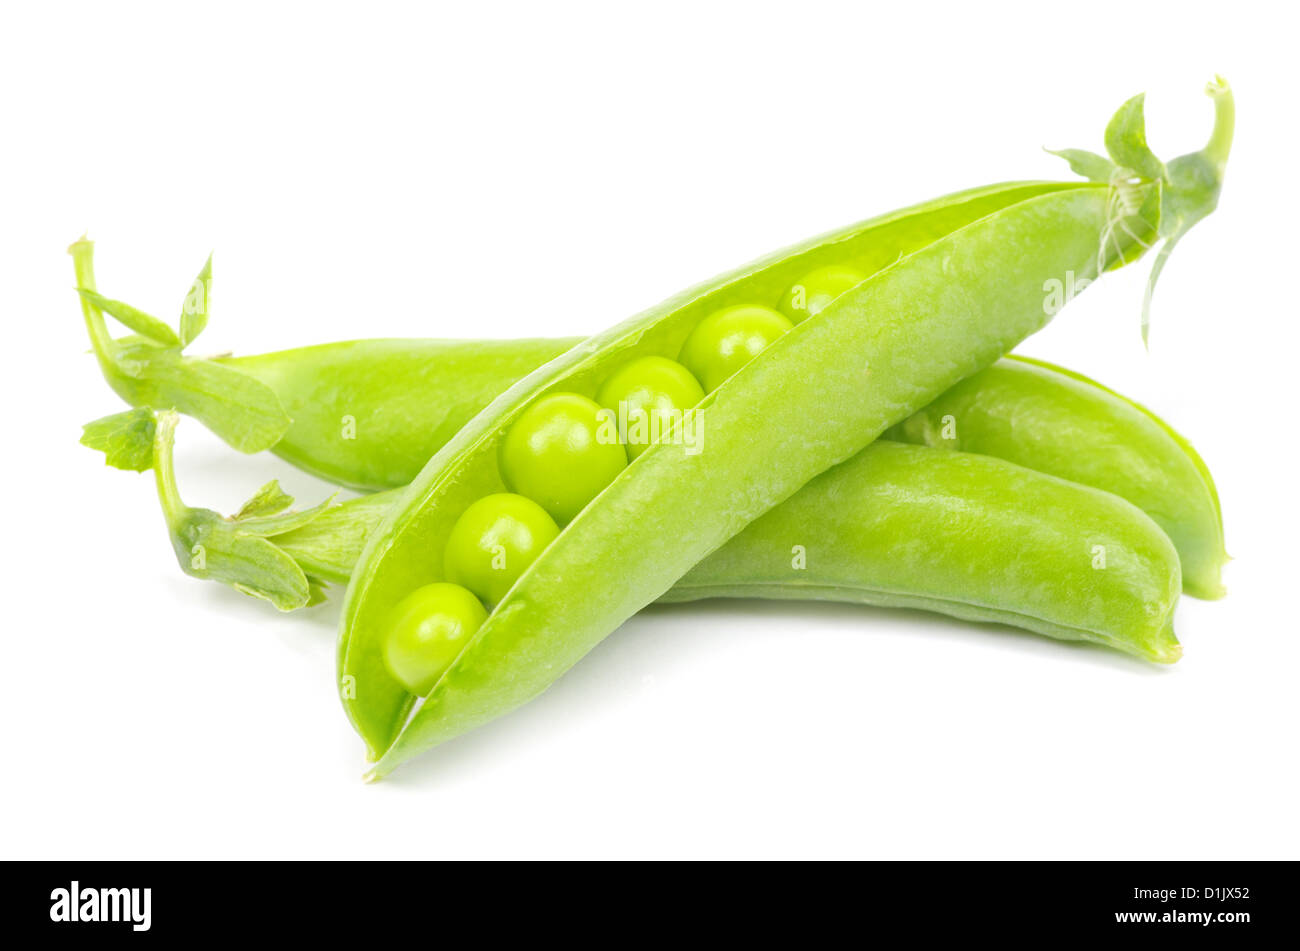 Petits pois légumes libre isolated on white Banque D'Images